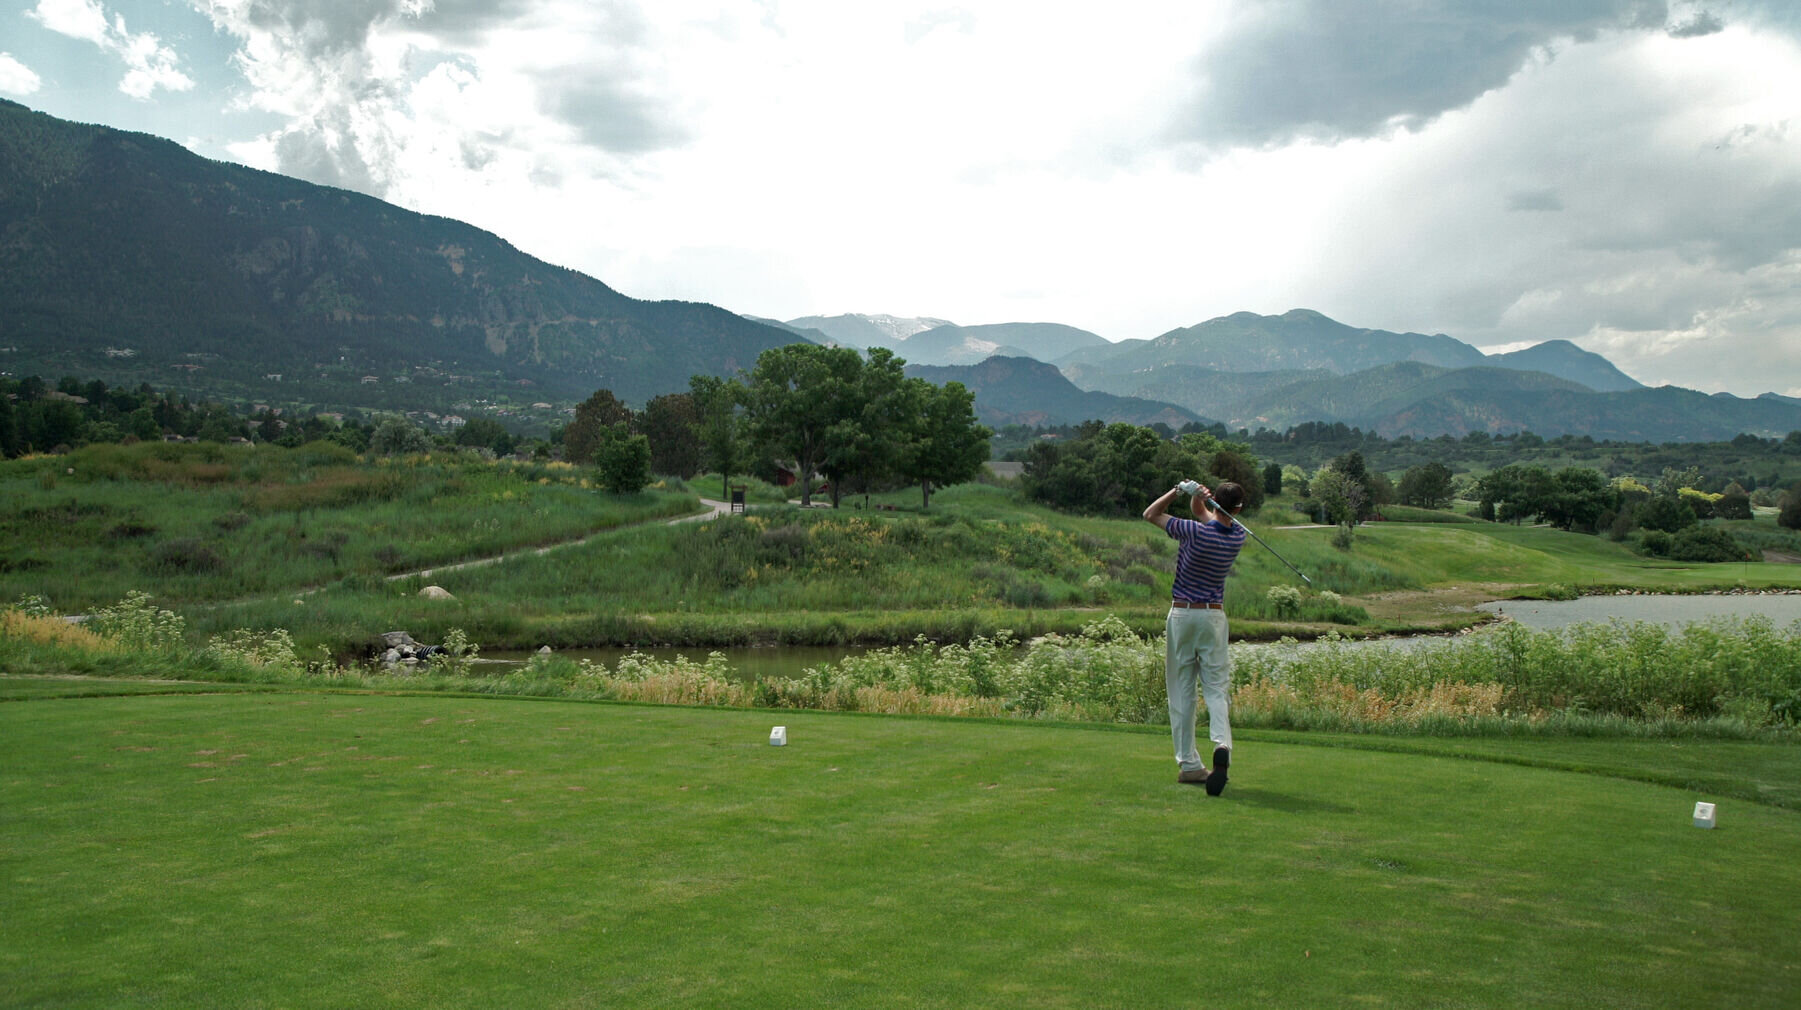 Man swinging on golf course with mountains in the background